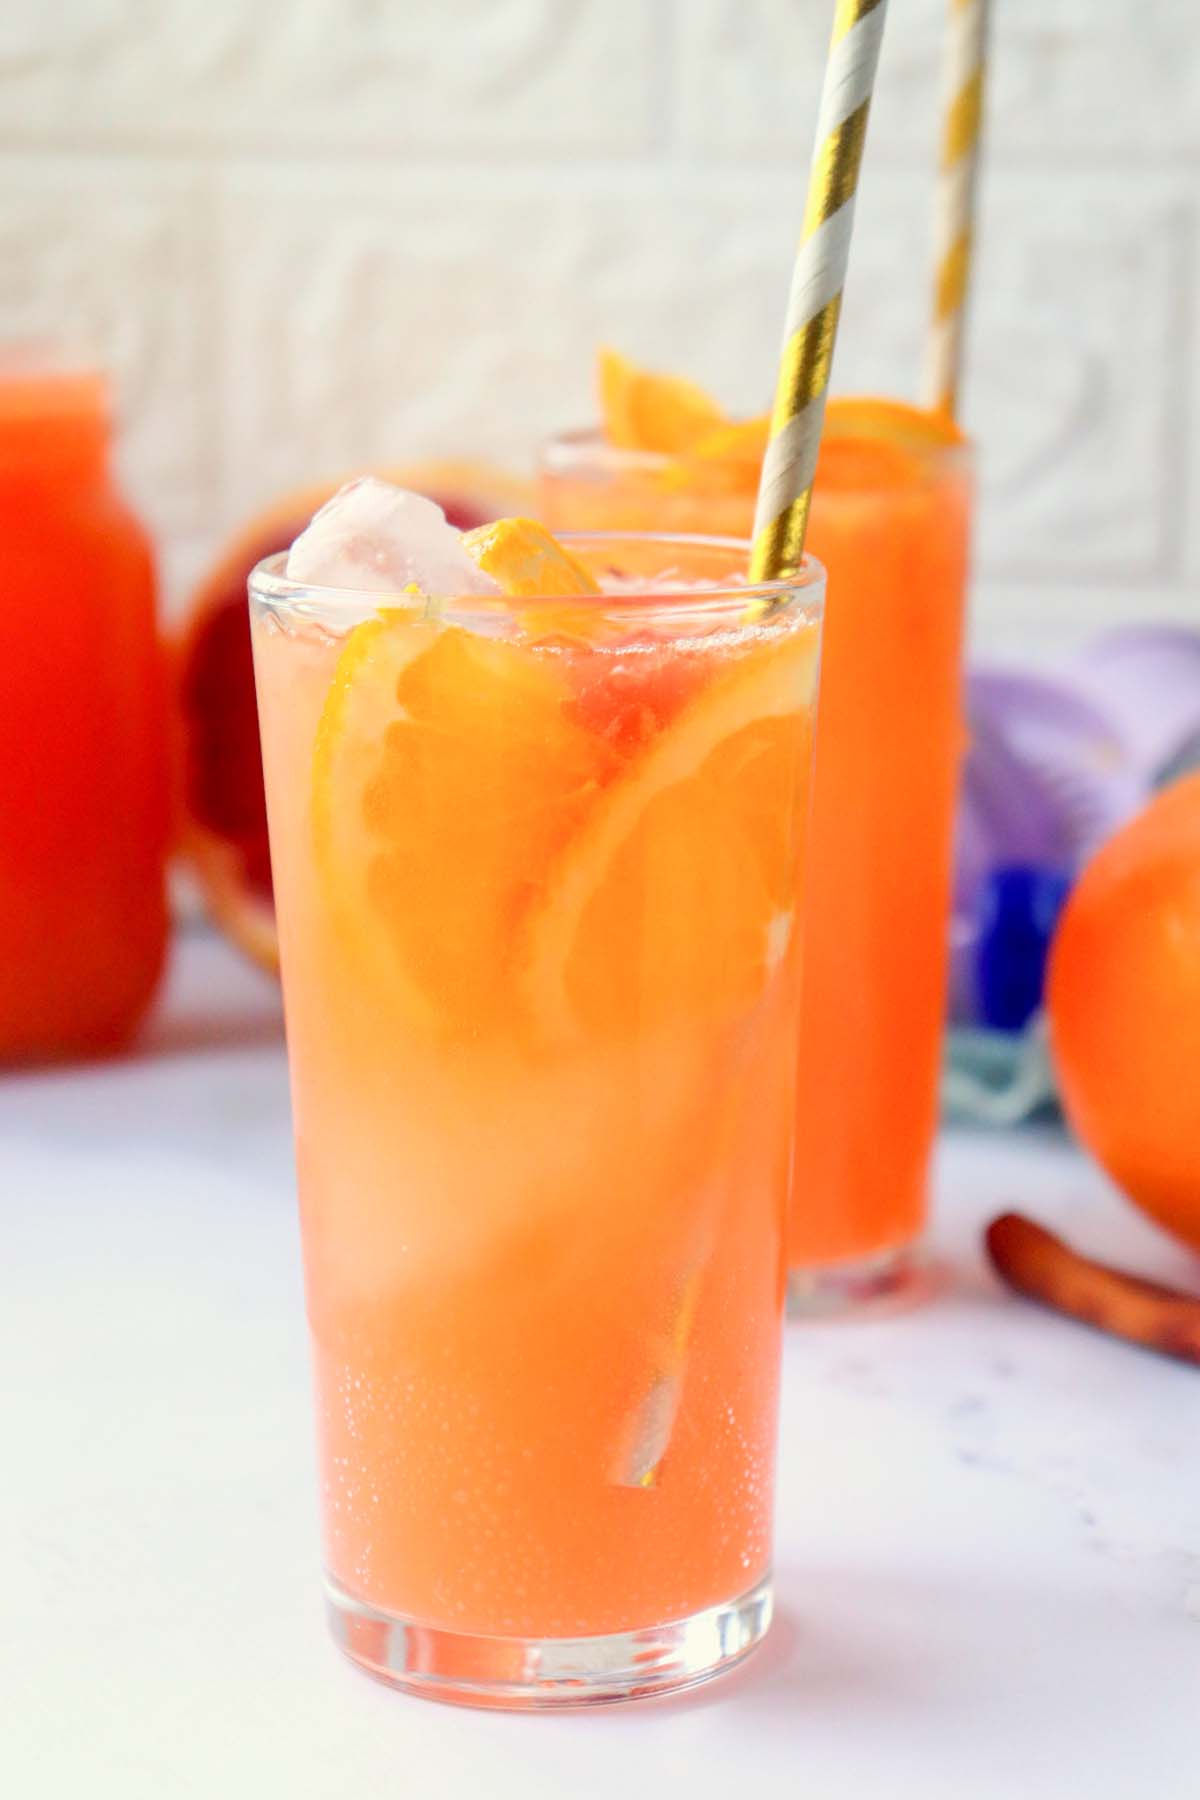 citrus punch in a glass with a straw.